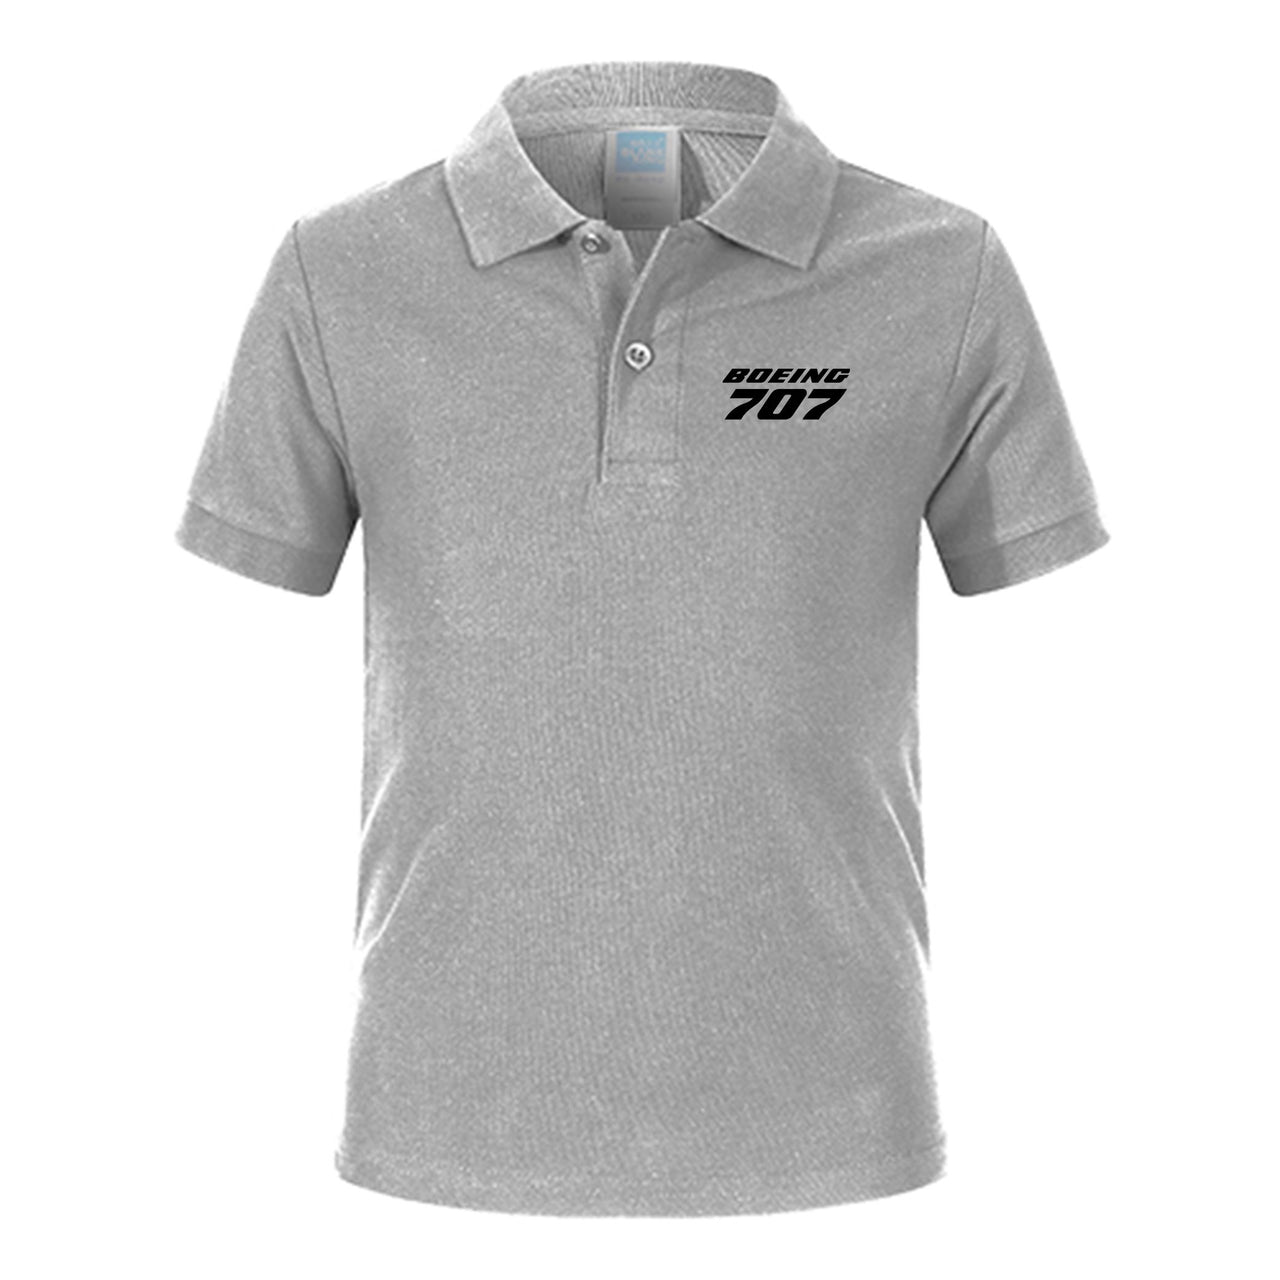 Boeing 707 & Text Designed Children Polo T-Shirts